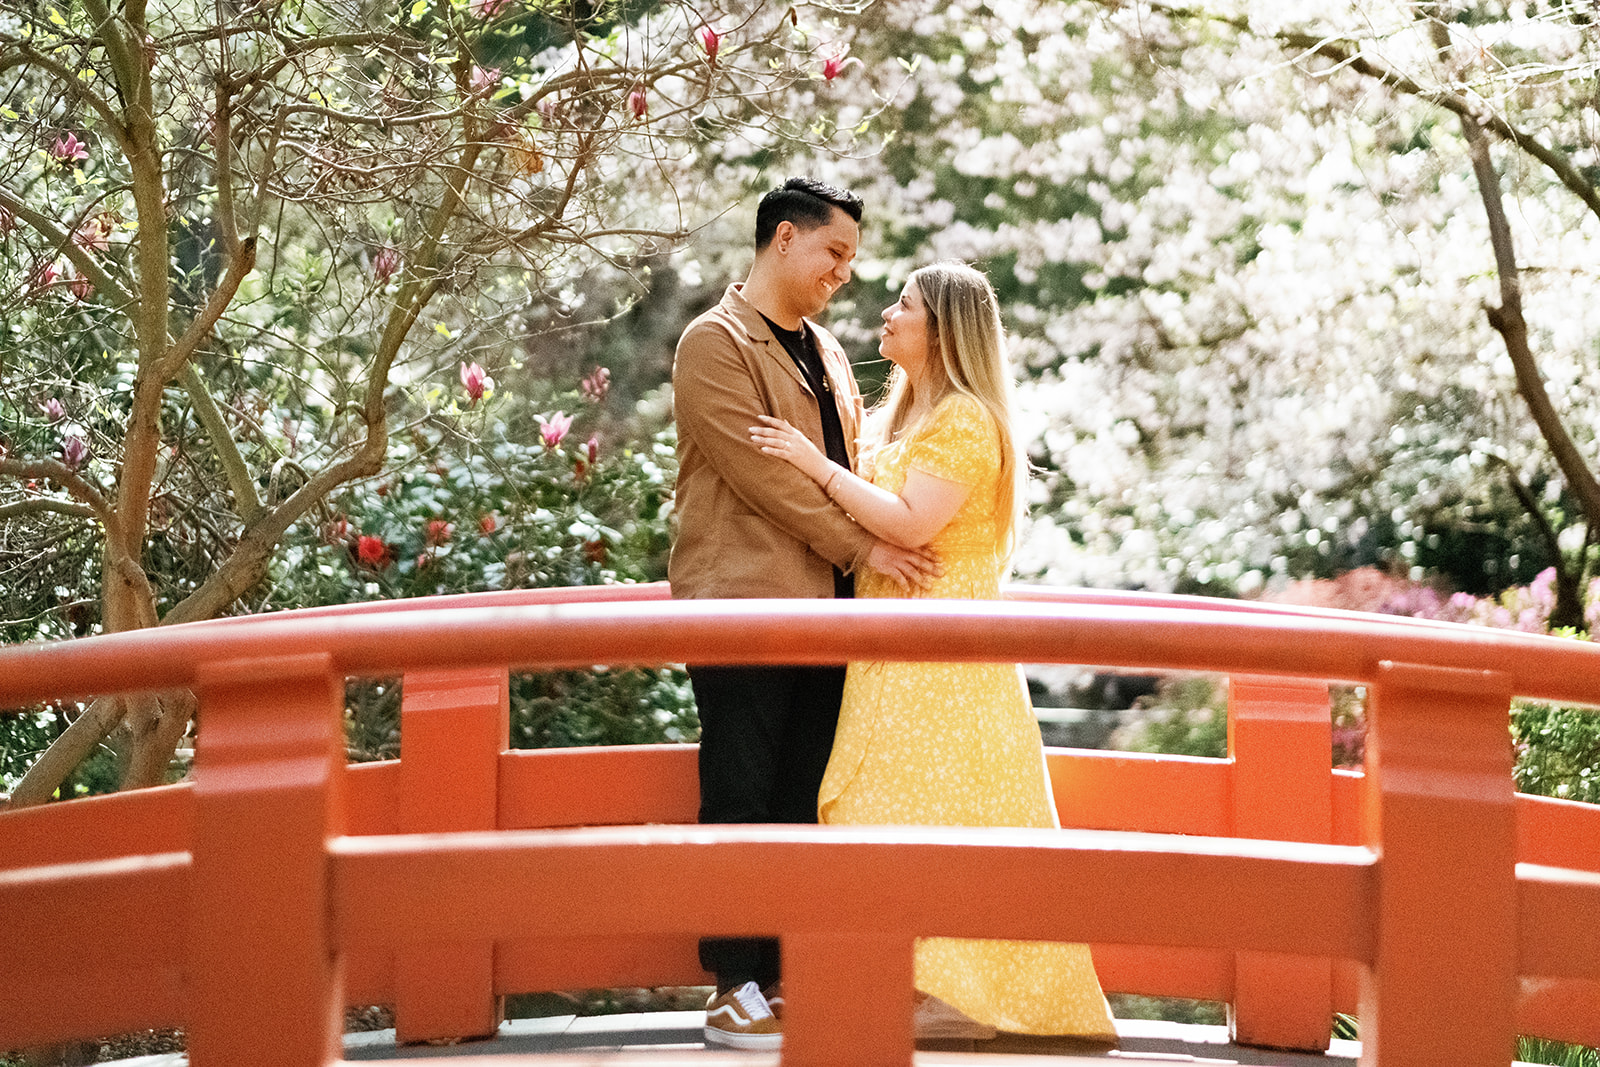 Proposal & Engagement Session - Descanso Gardens - Glendale, California - Outdoor Portraits